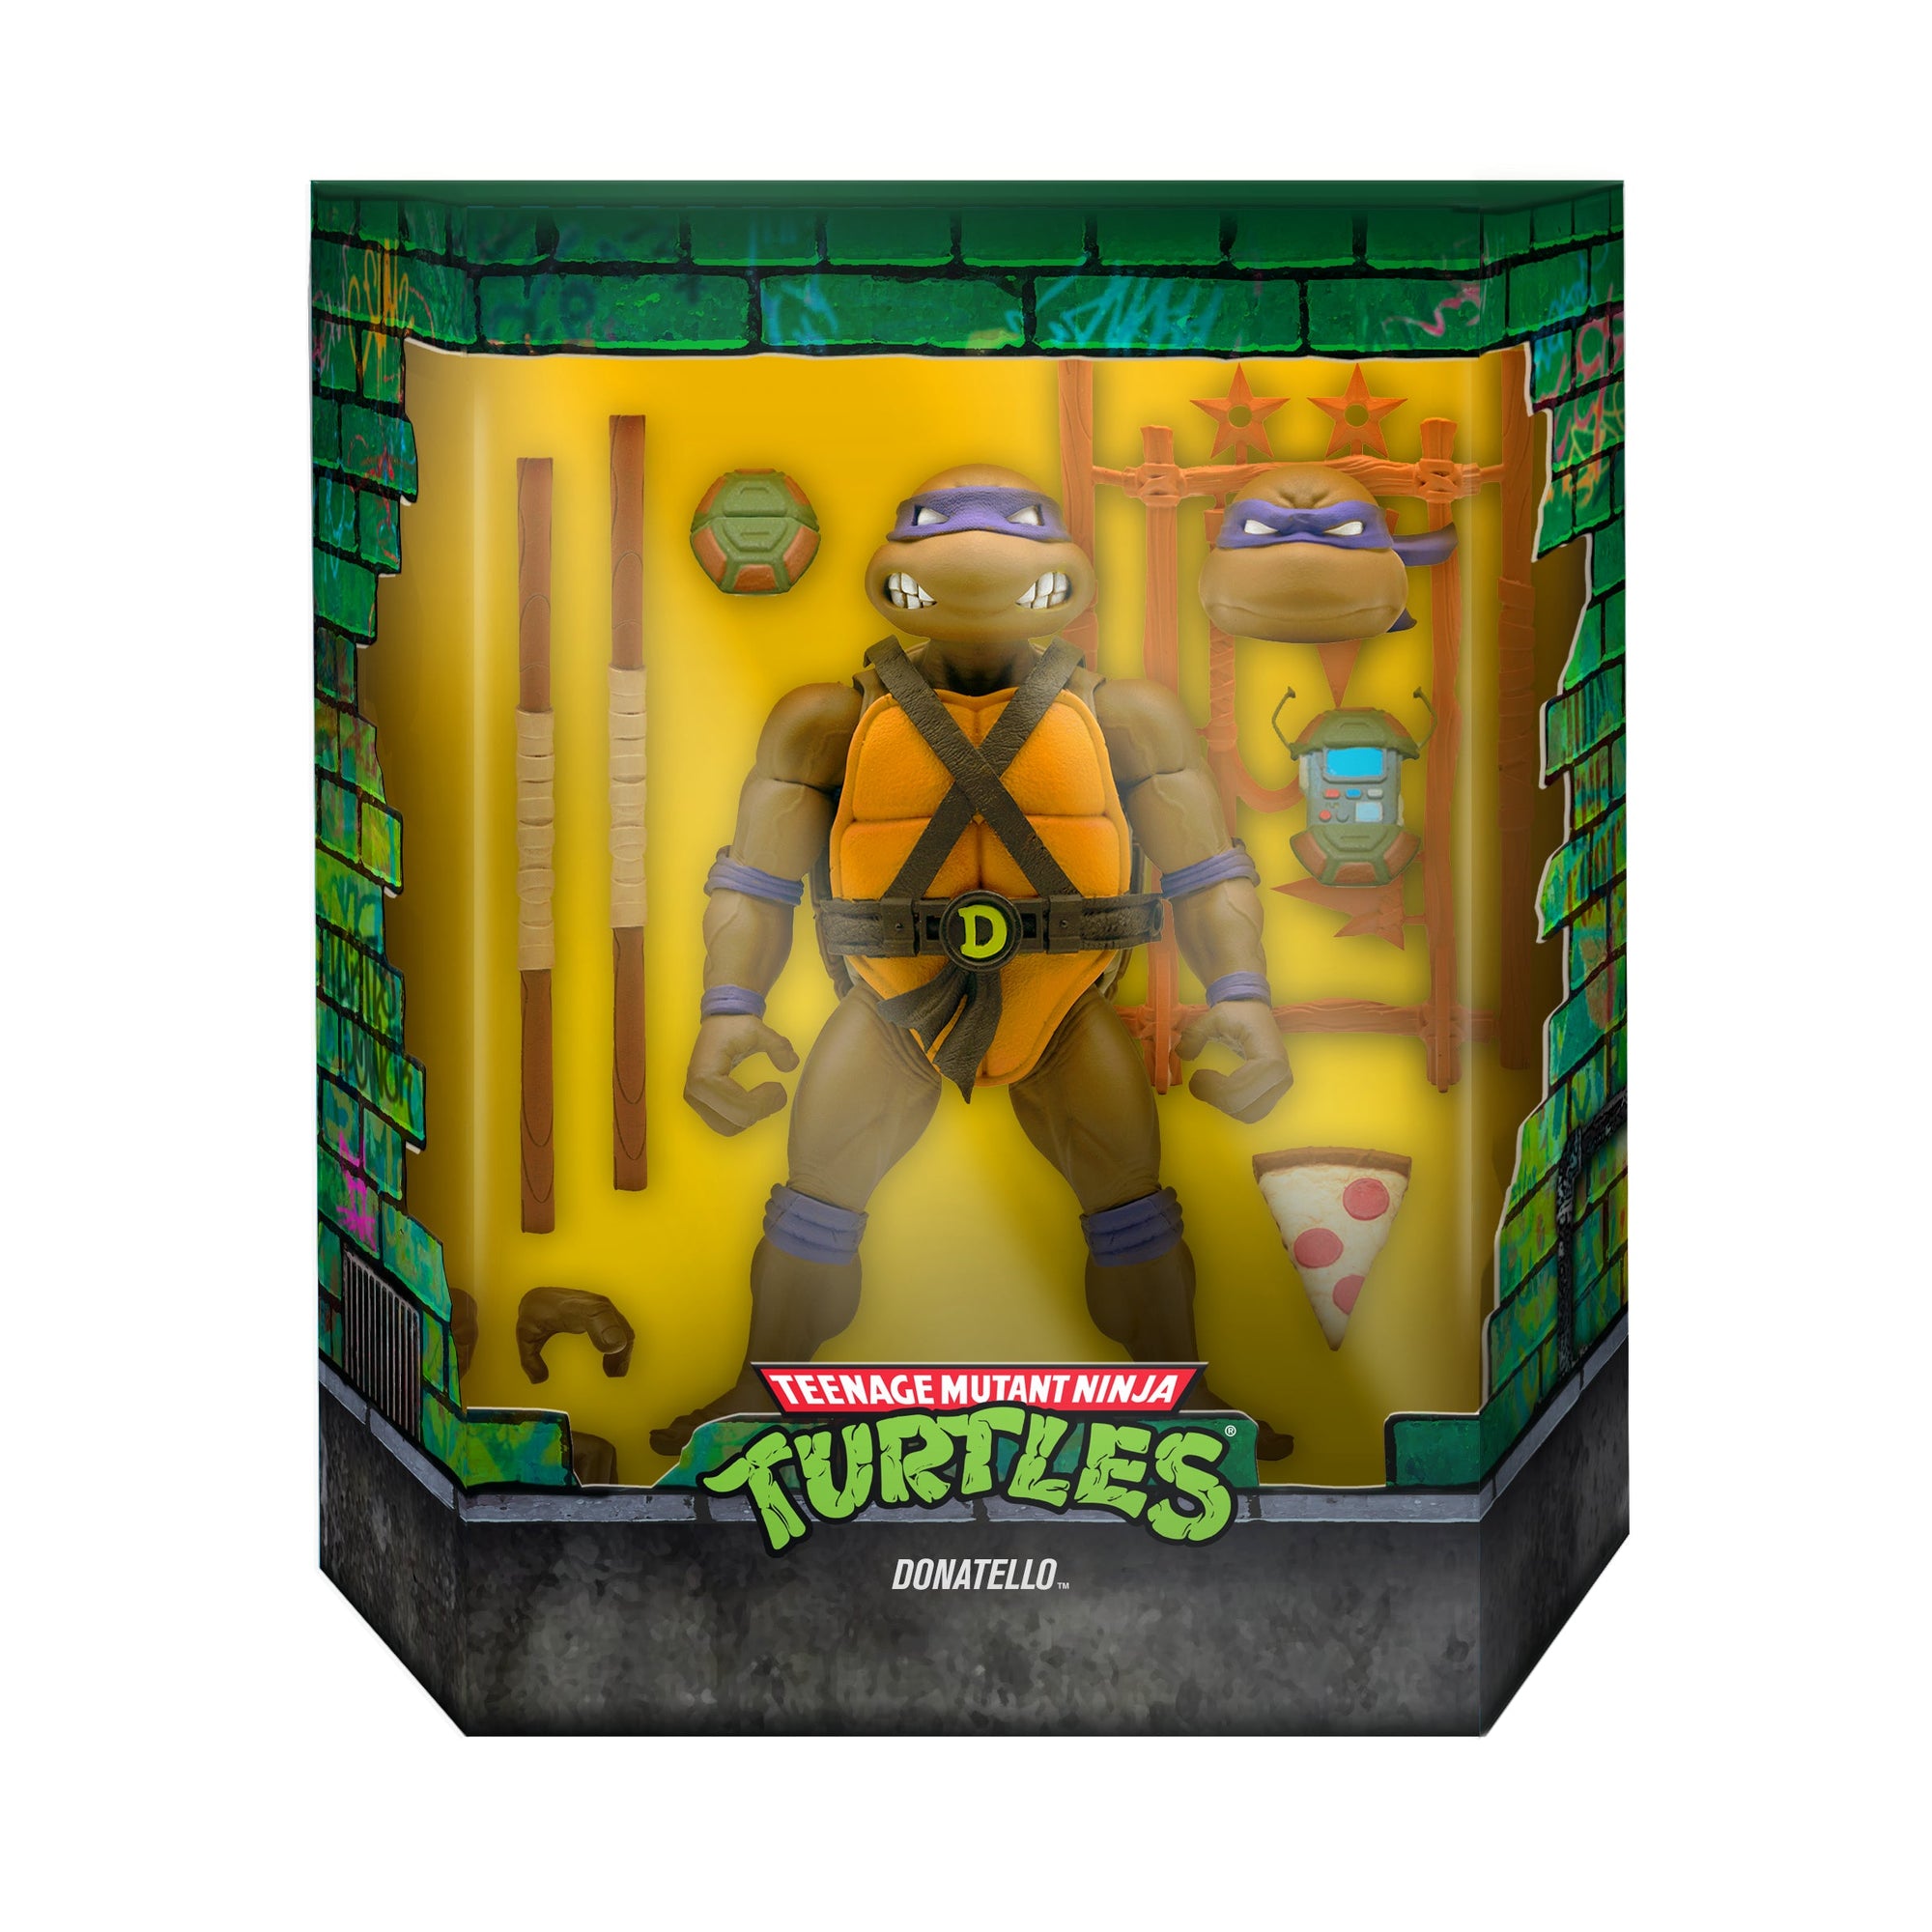 Donatello 7" Ultimate Action Figure - TMNT Wave 4 by Super7